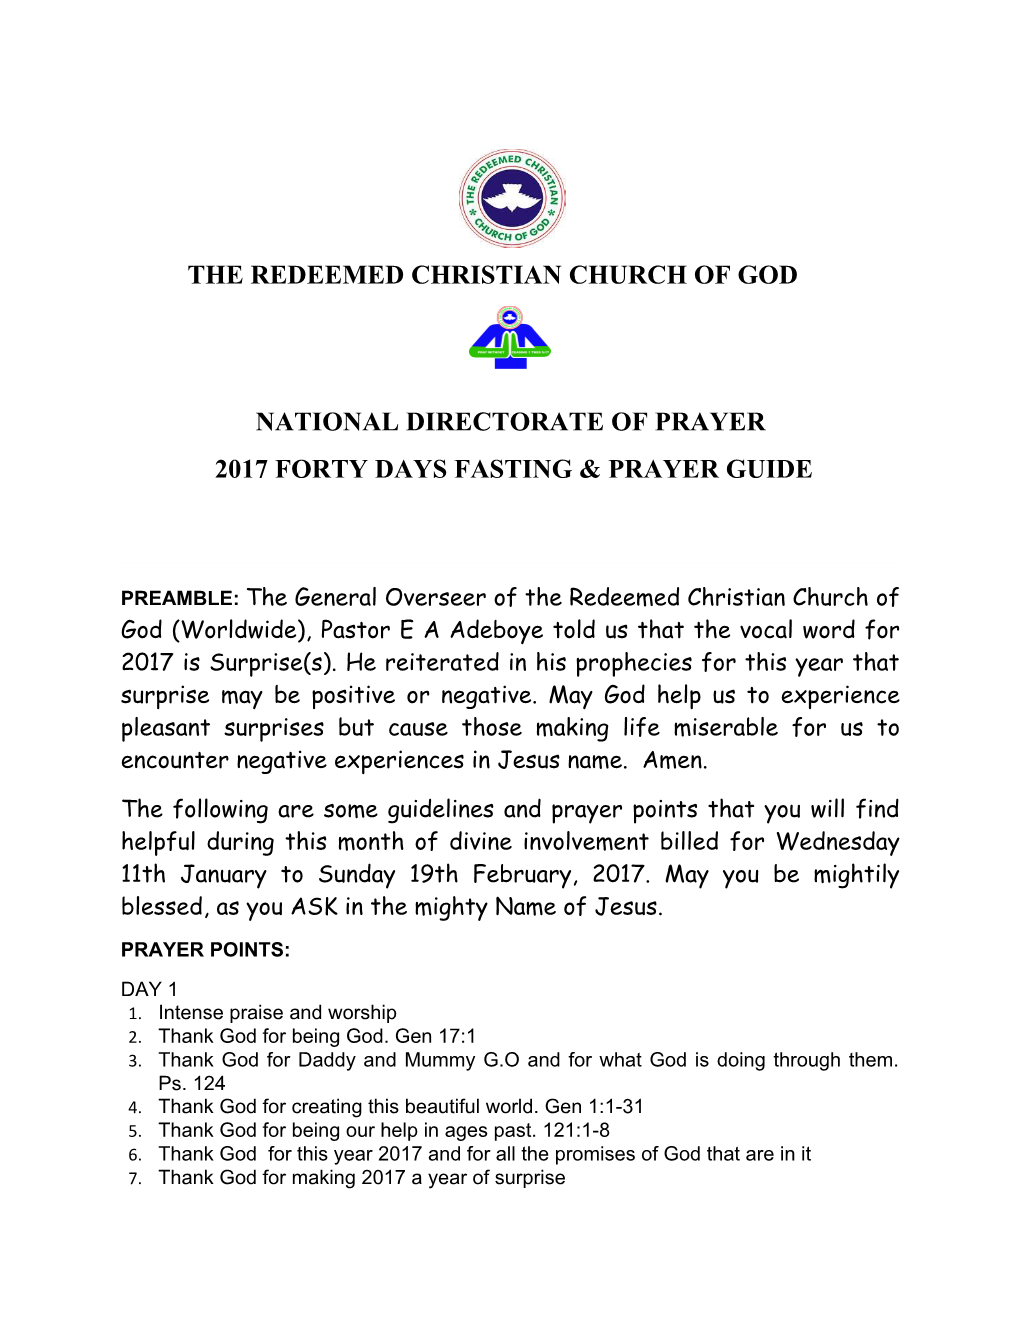 2017Forty Days Fasting & Prayer Guide